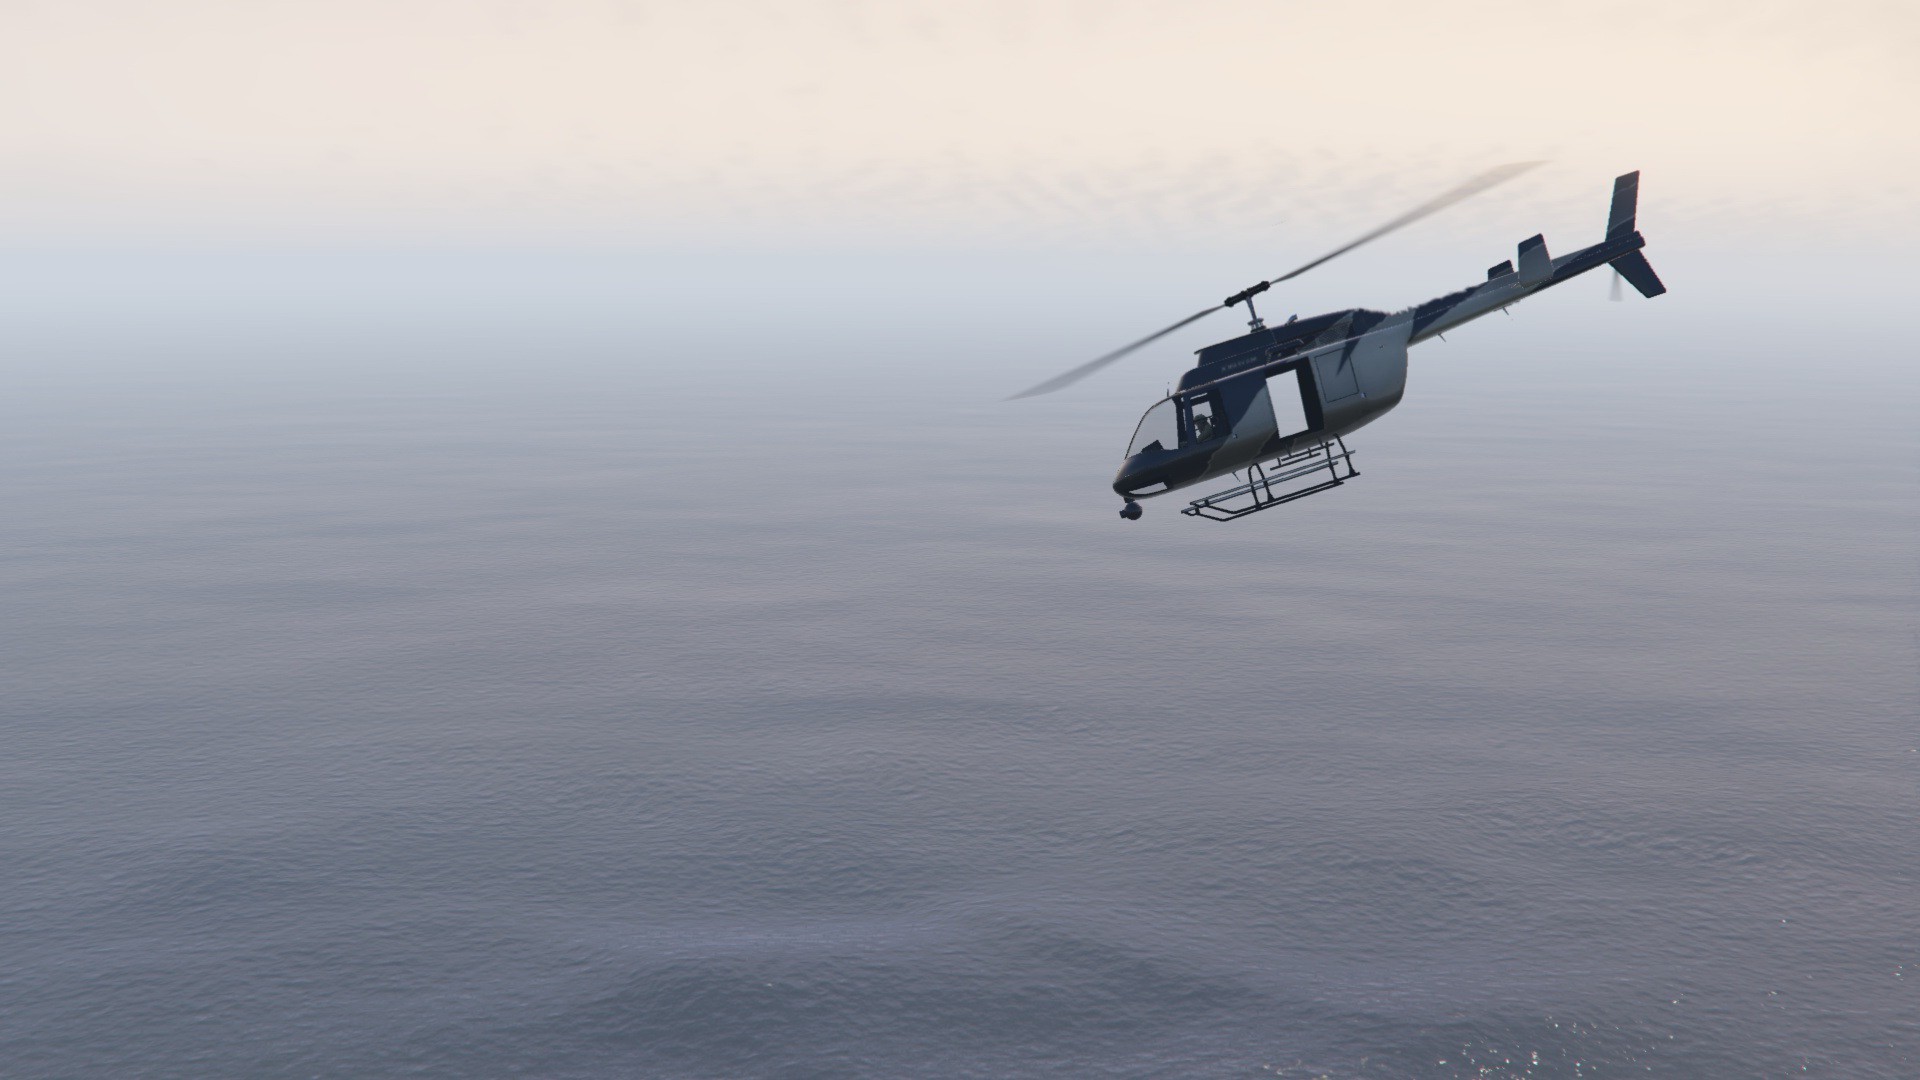 Grand Theft Auto V, Grand Theft Auto V Online, Rockstar Games, Screenshots, PC Gaming, Helicopters Wallpaper